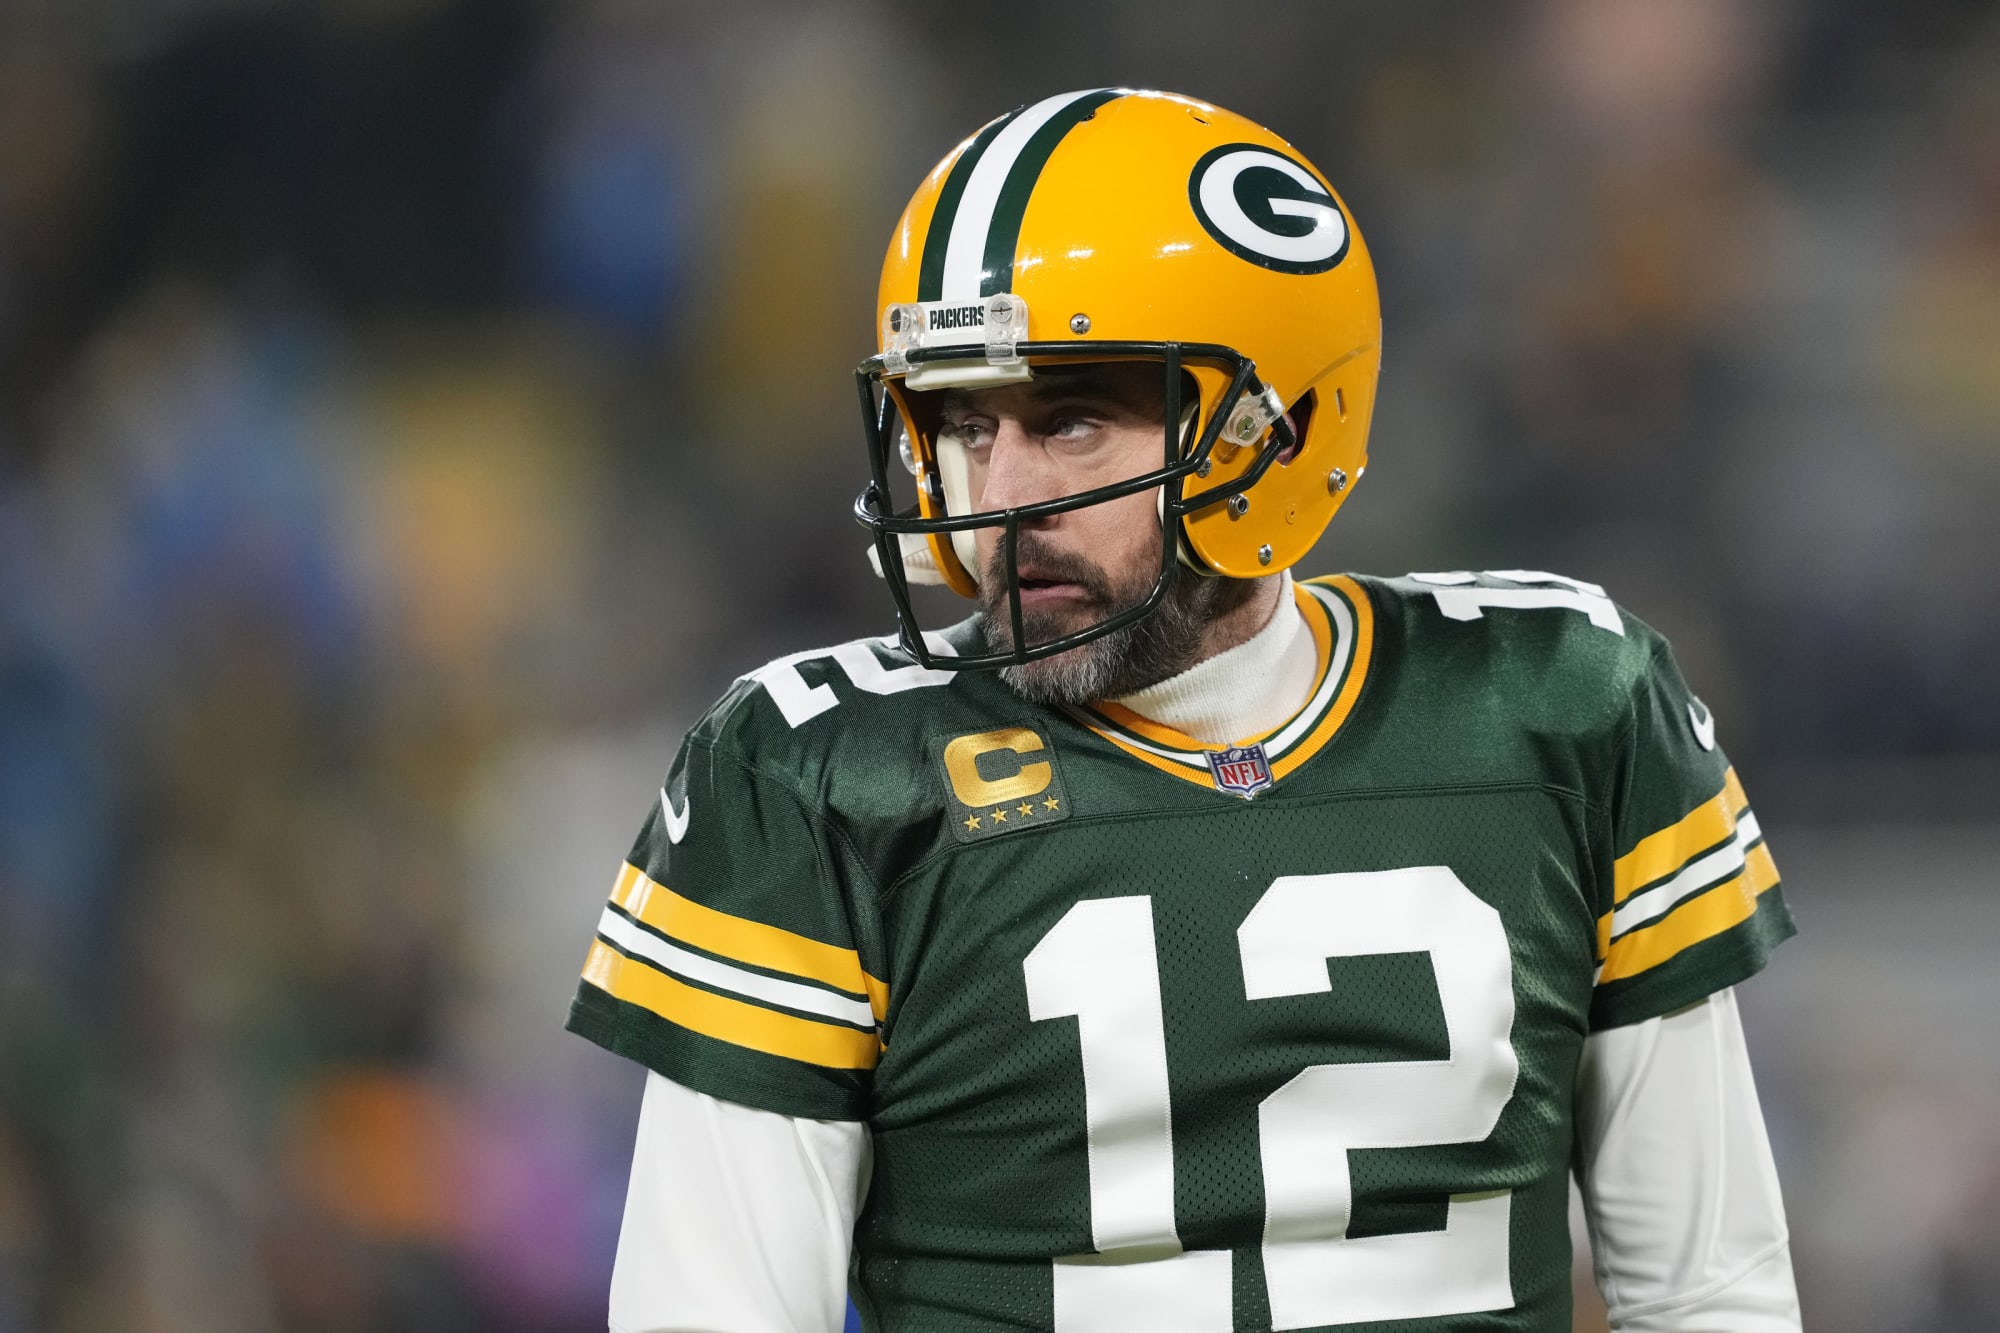 Was Packers WR’s Jordan Love praise a shot at Aaron Rodgers?